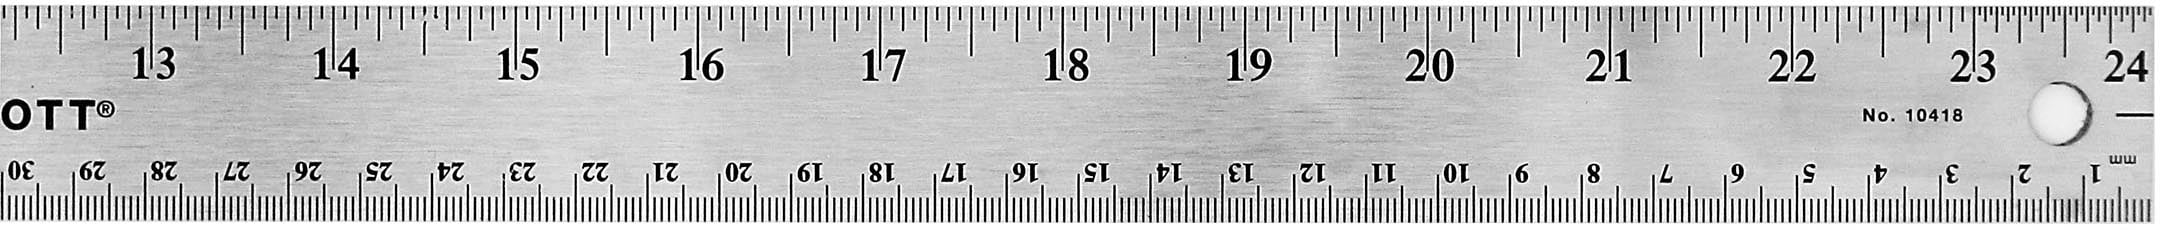 18 Stainless Steel Ruler with Non-Skid Cork Backing 32 & 64 divisions per inch 